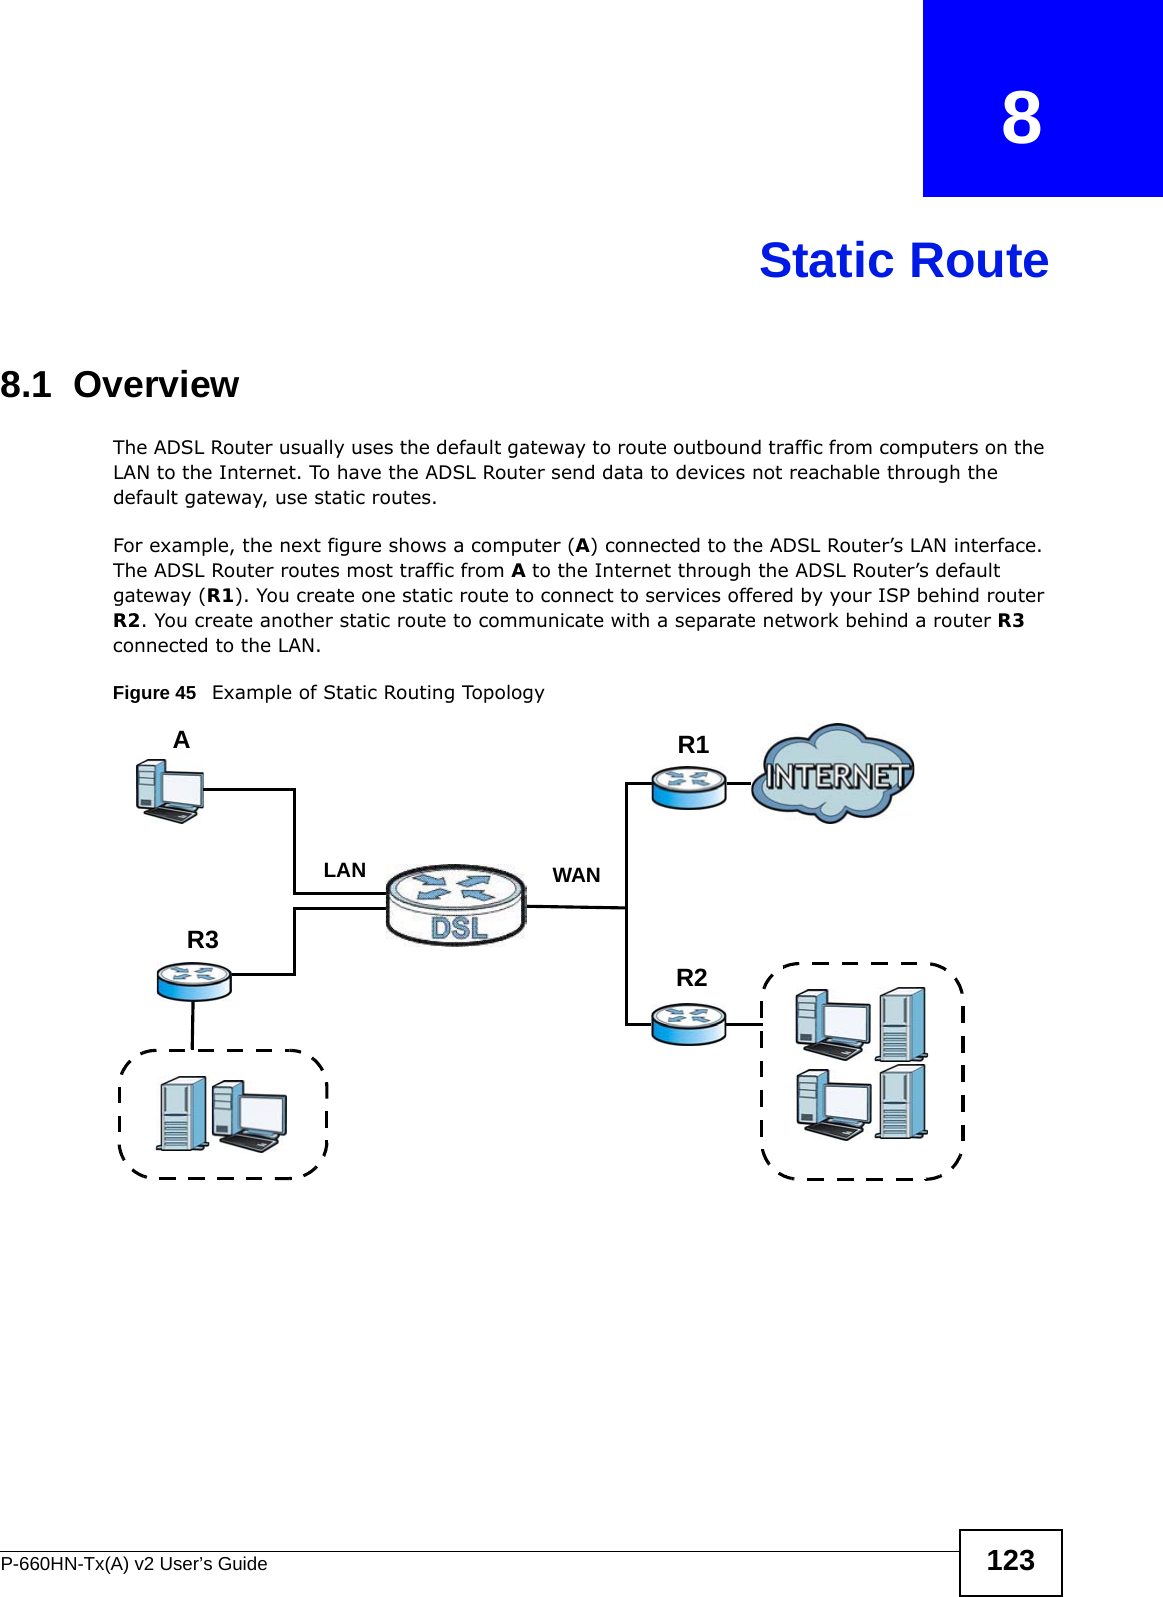 P-660HN-Tx(A) v2 User’s Guide 123CHAPTER   8Static Route8.1  Overview The ADSL Router usually uses the default gateway to route outbound traffic from computers on the LAN to the Internet. To have the ADSL Router send data to devices not reachable through the default gateway, use static routes.For example, the next figure shows a computer (A) connected to the ADSL Router’s LAN interface. The ADSL Router routes most traffic from A to the Internet through the ADSL Router’s default gateway (R1). You create one static route to connect to services offered by your ISP behind router R2. You create another static route to communicate with a separate network behind a router R3 connected to the LAN.   Figure 45   Example of Static Routing TopologyWANR1R2AR3LAN